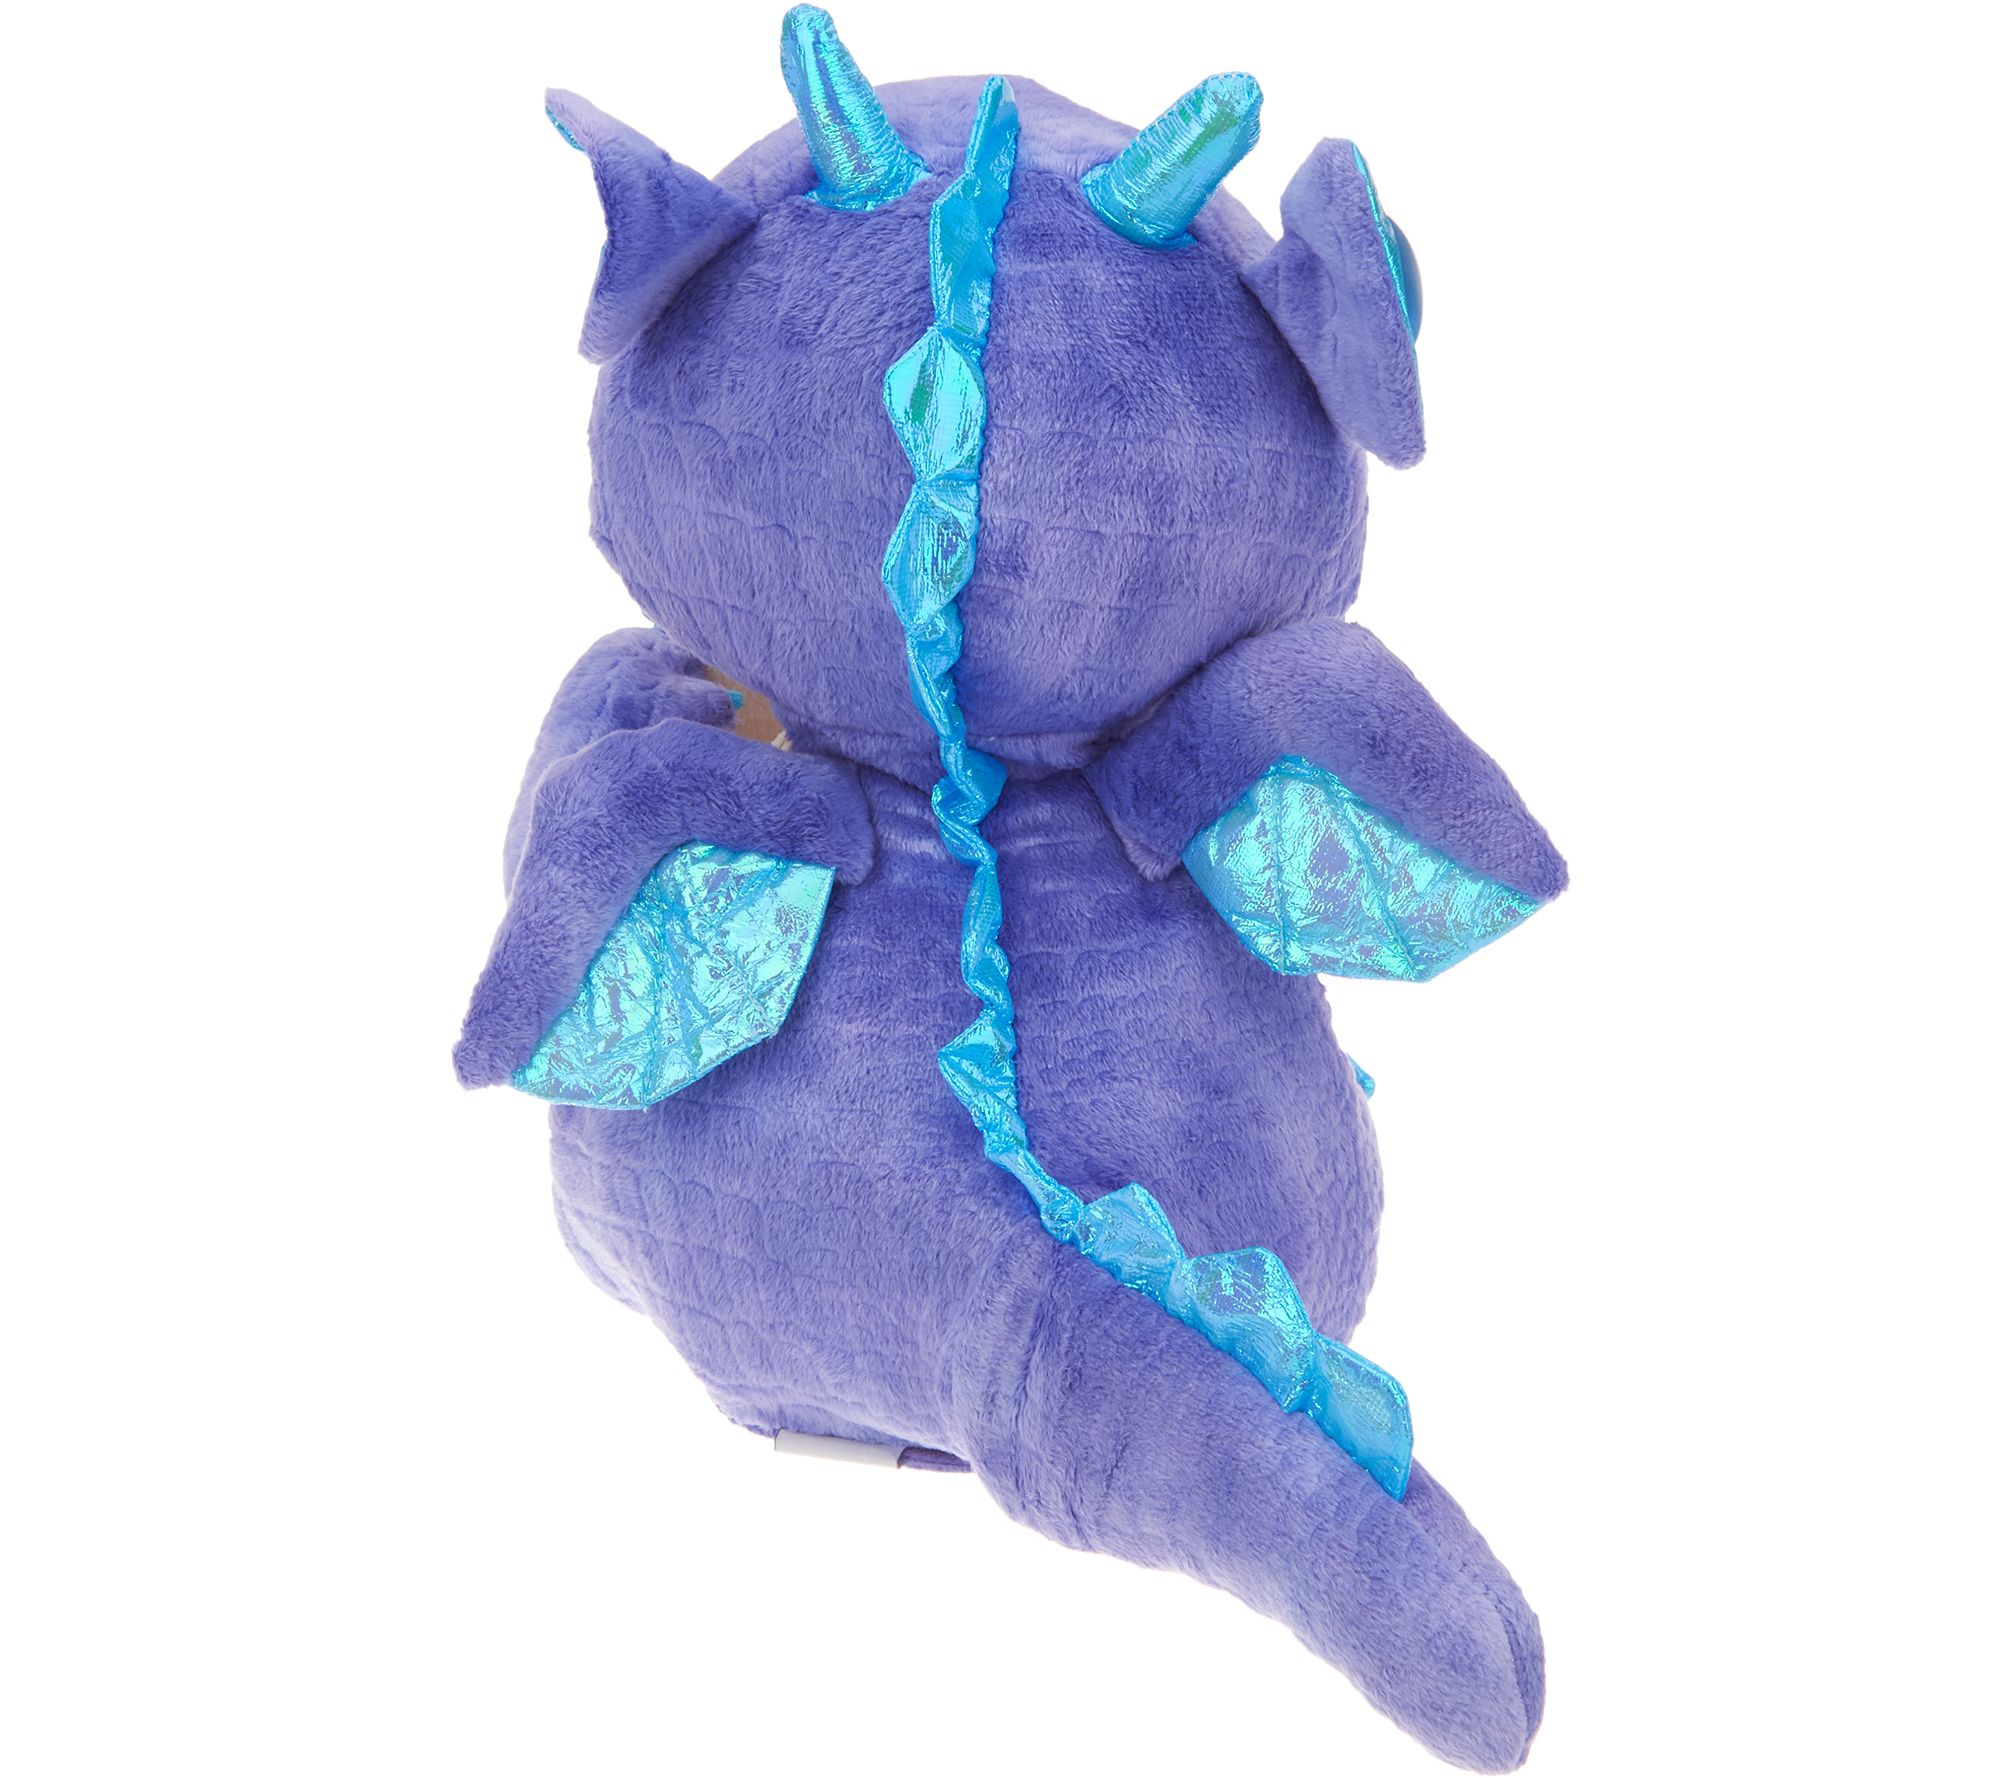 Cuddle Barn Duncan The Storytelling Animated Dragon 12/" Plush Preowned Works for sale online